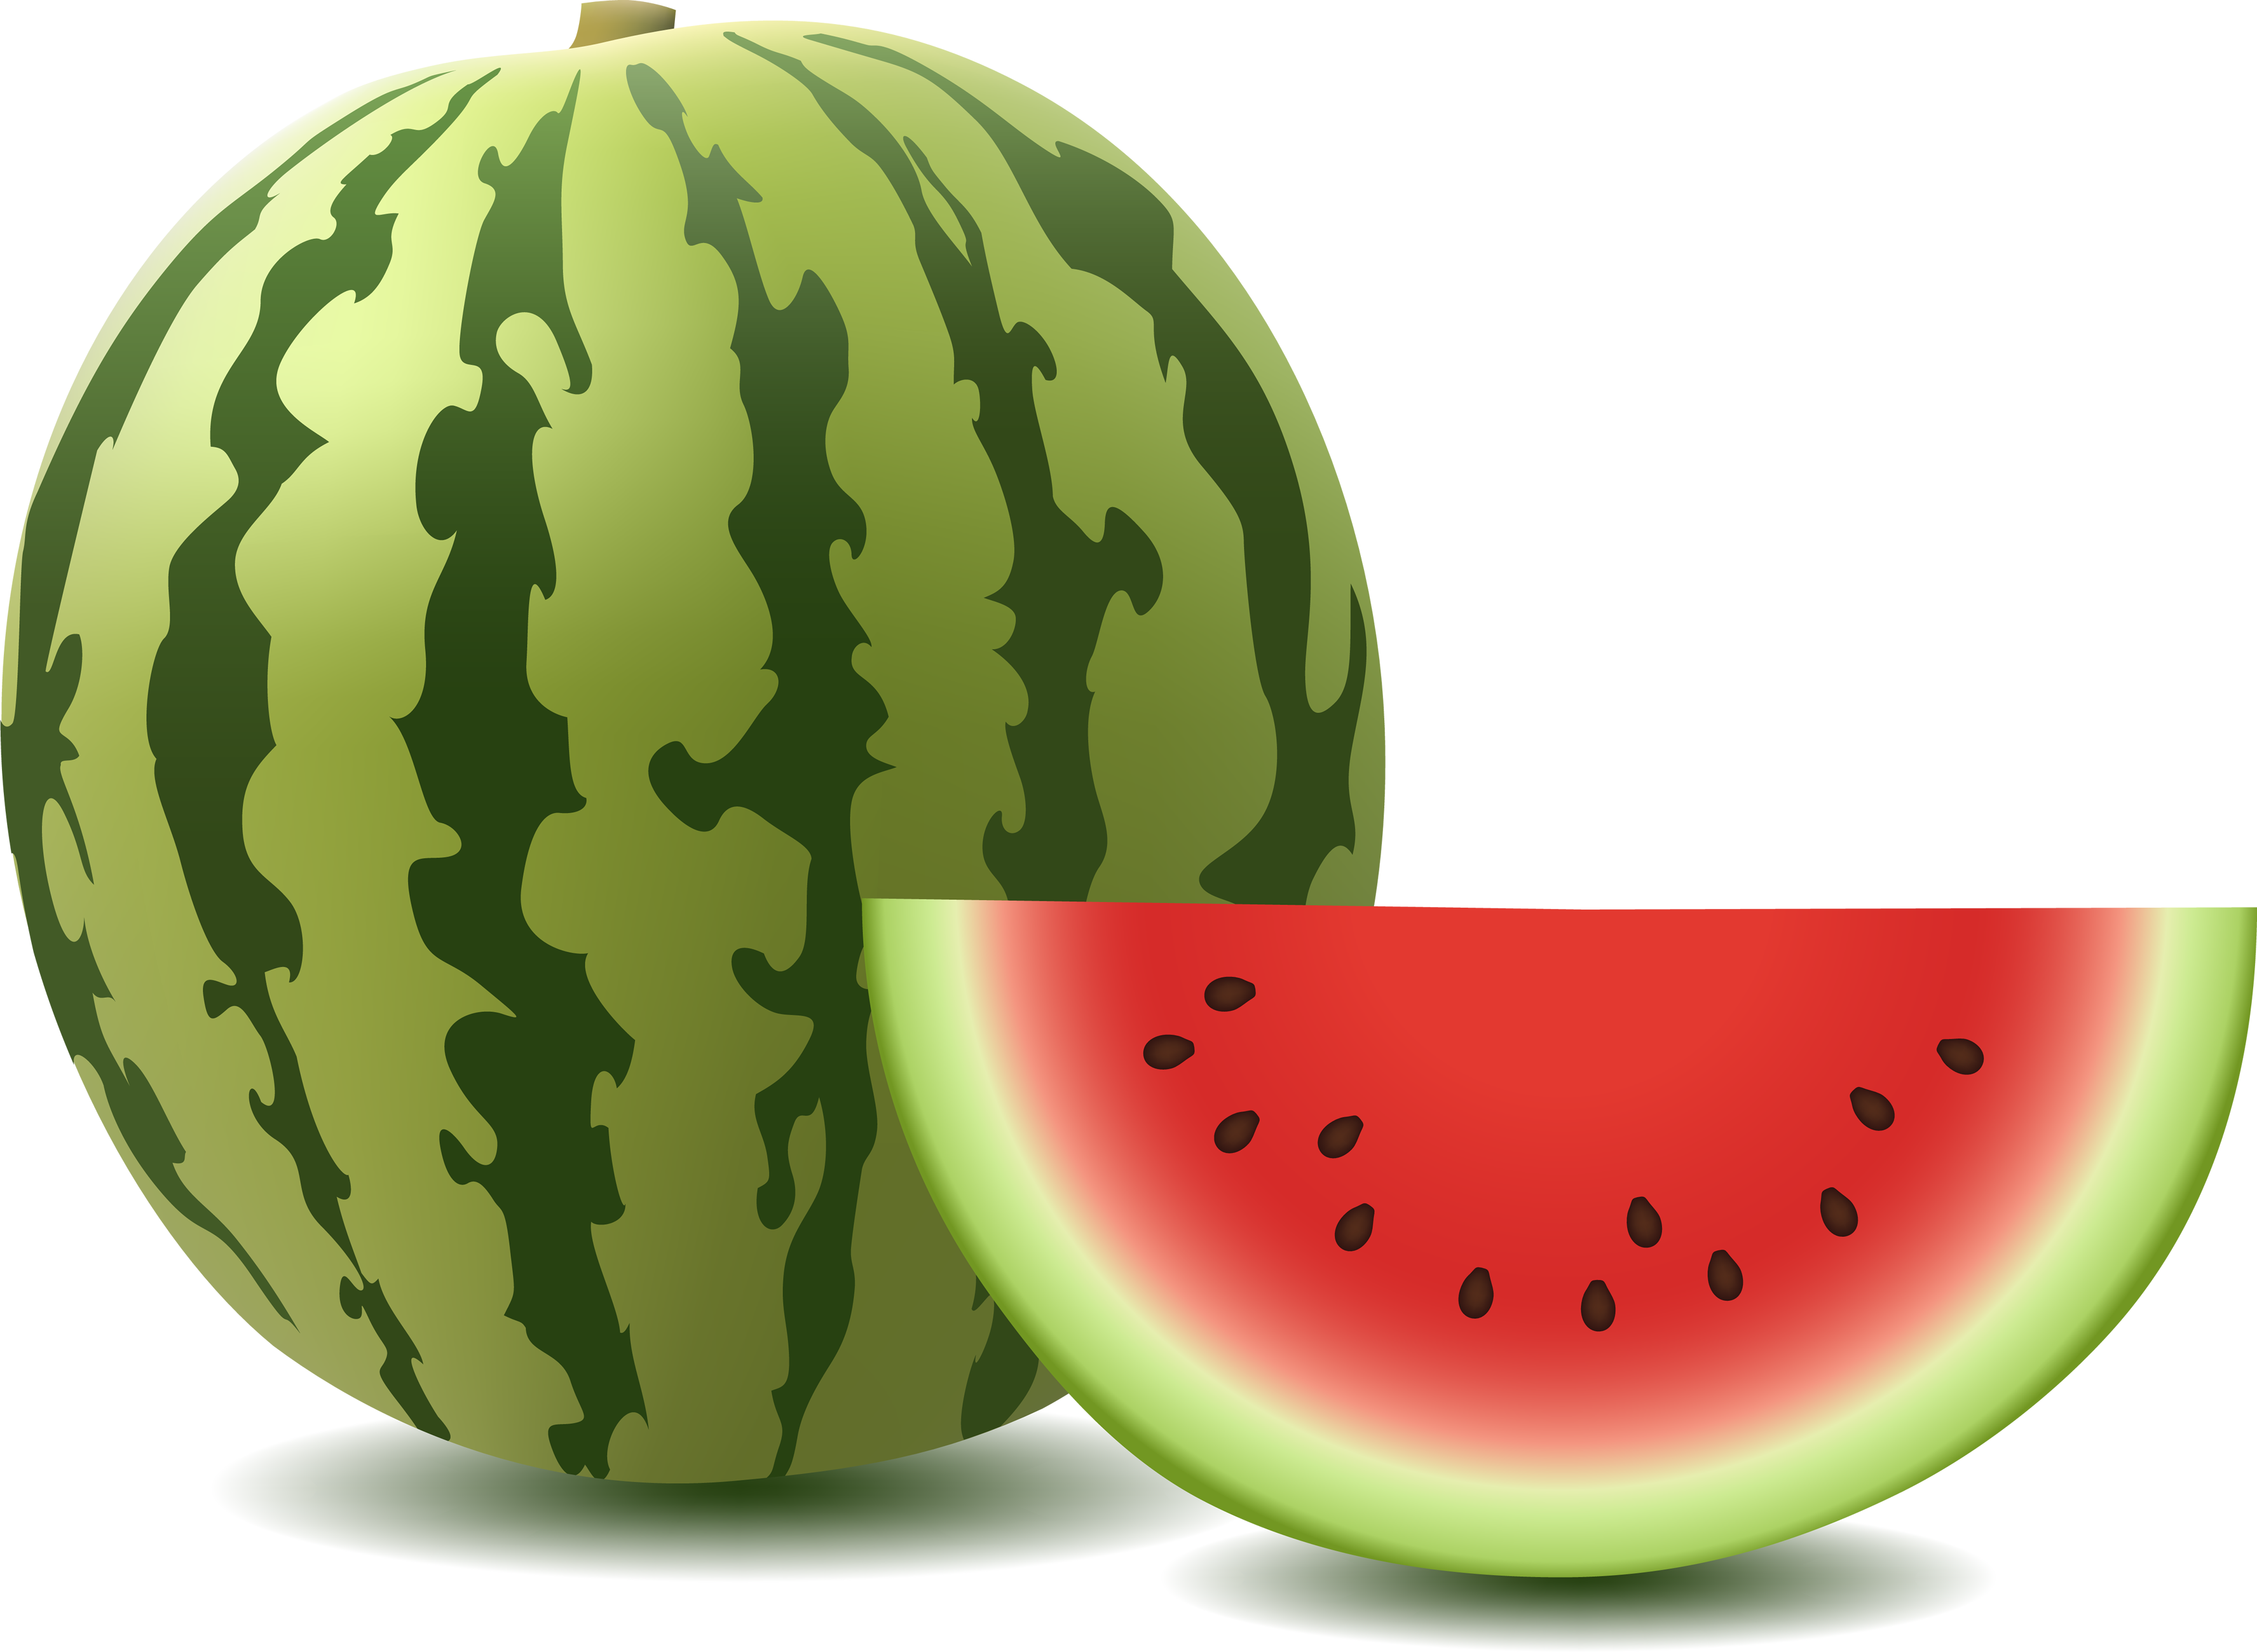 Png images free download. Watermelon clipart tarbooz